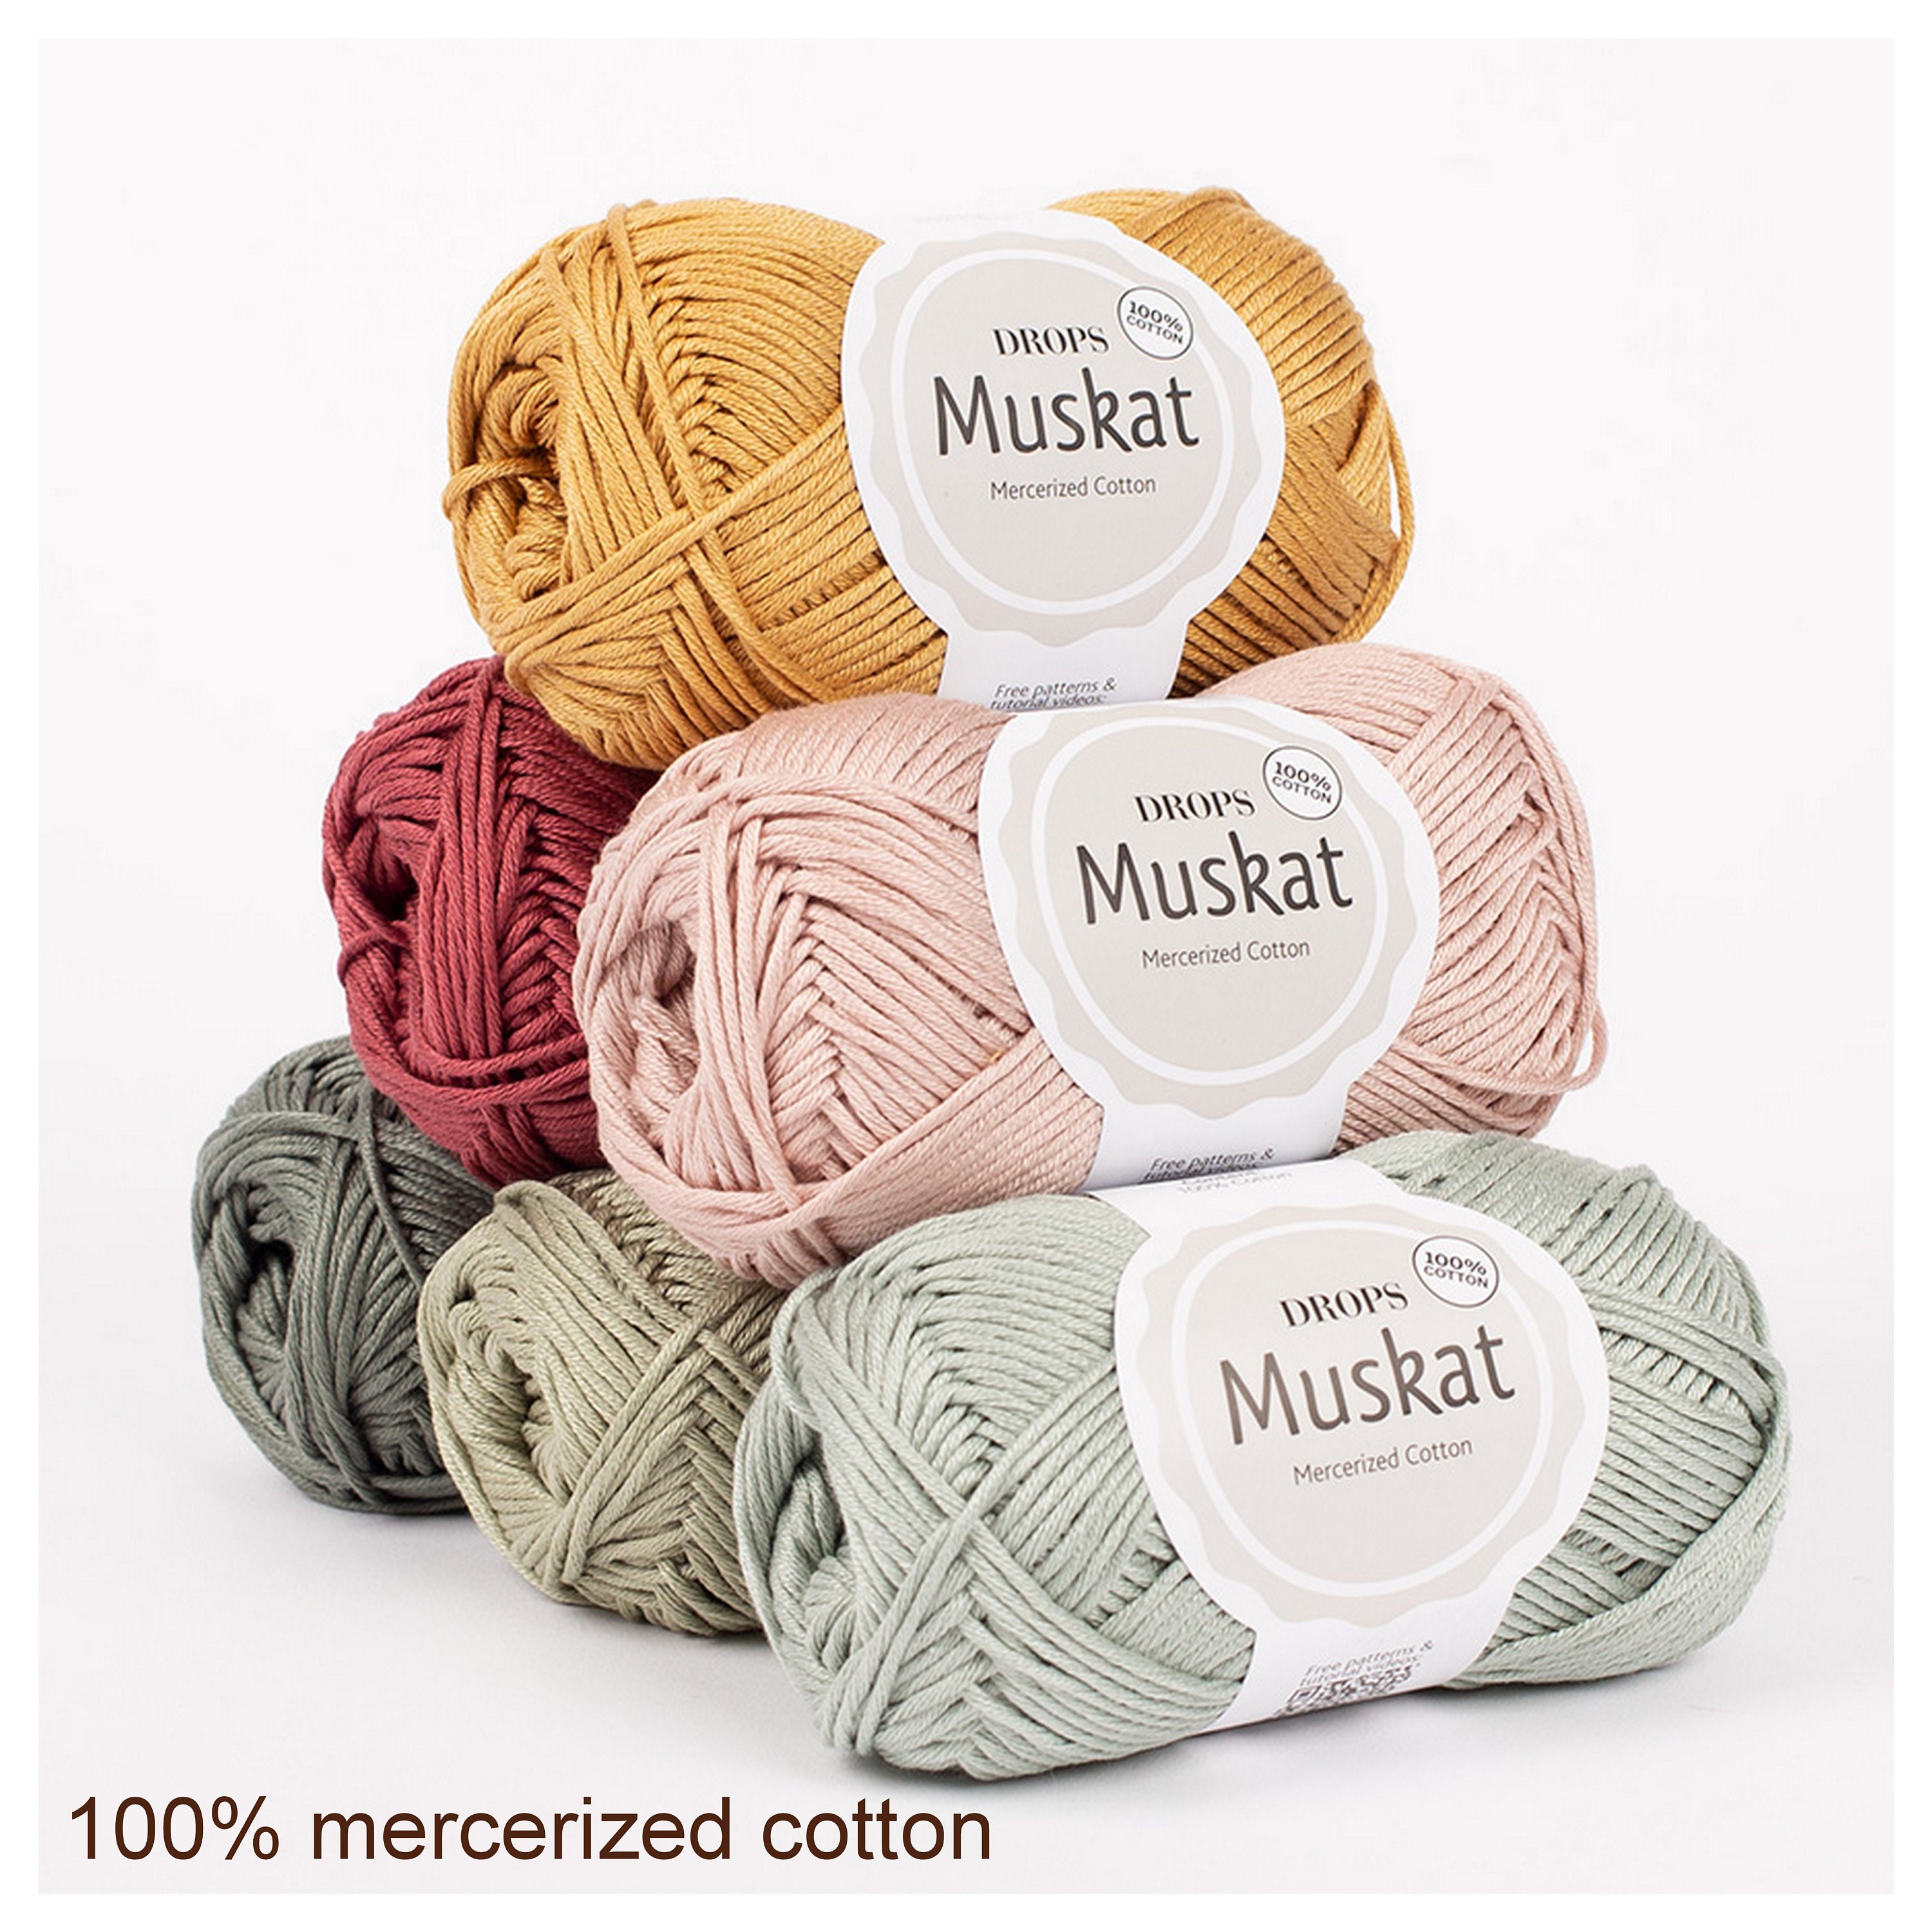 100% Cotton Yarn for Knitting and Crocheting, 3 or Light, DK, Worsted  Weight, Drops Muskat, 1.8 oz 109 Yards per Ball (18 White)